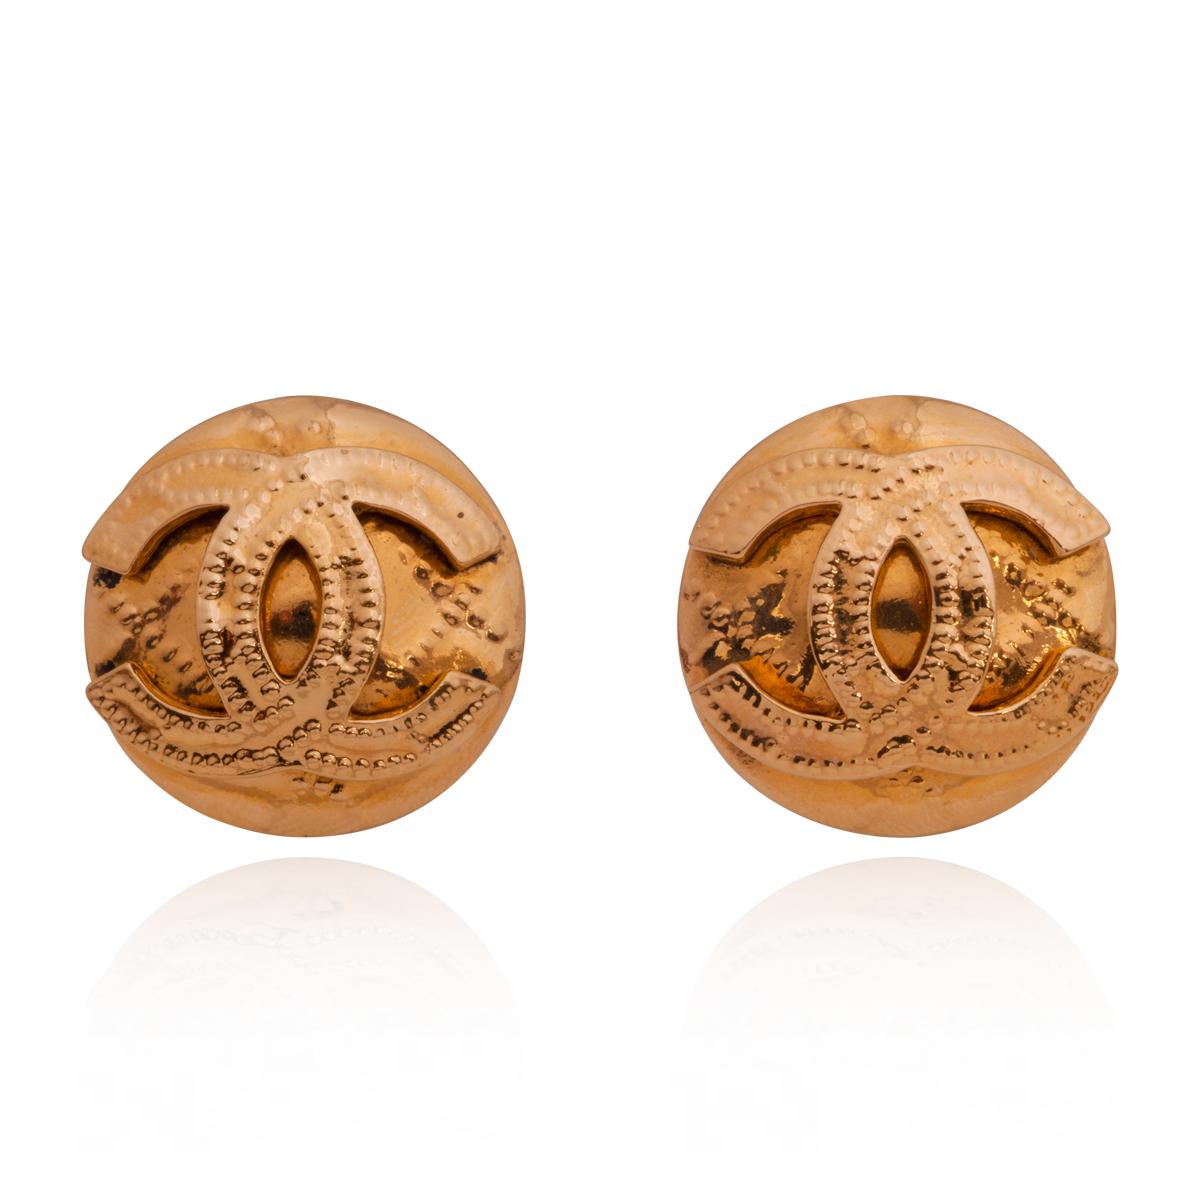 Chanel vintage round CC logo gold-tone clip earrings, France, 1990s.

Origin: France
Size: diameter 3 cm
Condition: in excellent condition and very clean

We guarantee the authenticity and quality of all our goods.